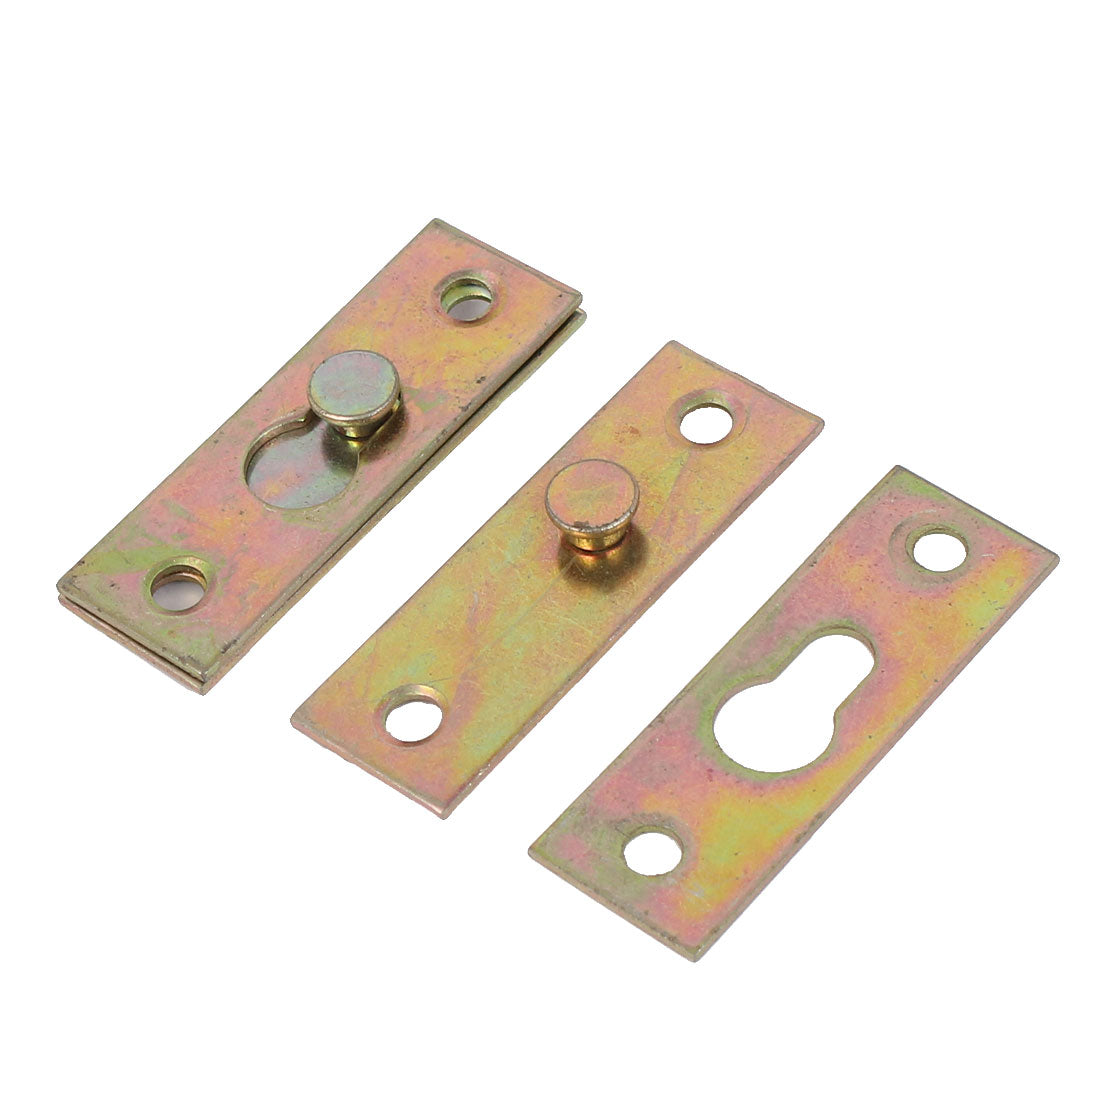 uxcell Uxcell Furniture Bed Rail Hook Plate Bracket Connector Brass Tone 2pcs